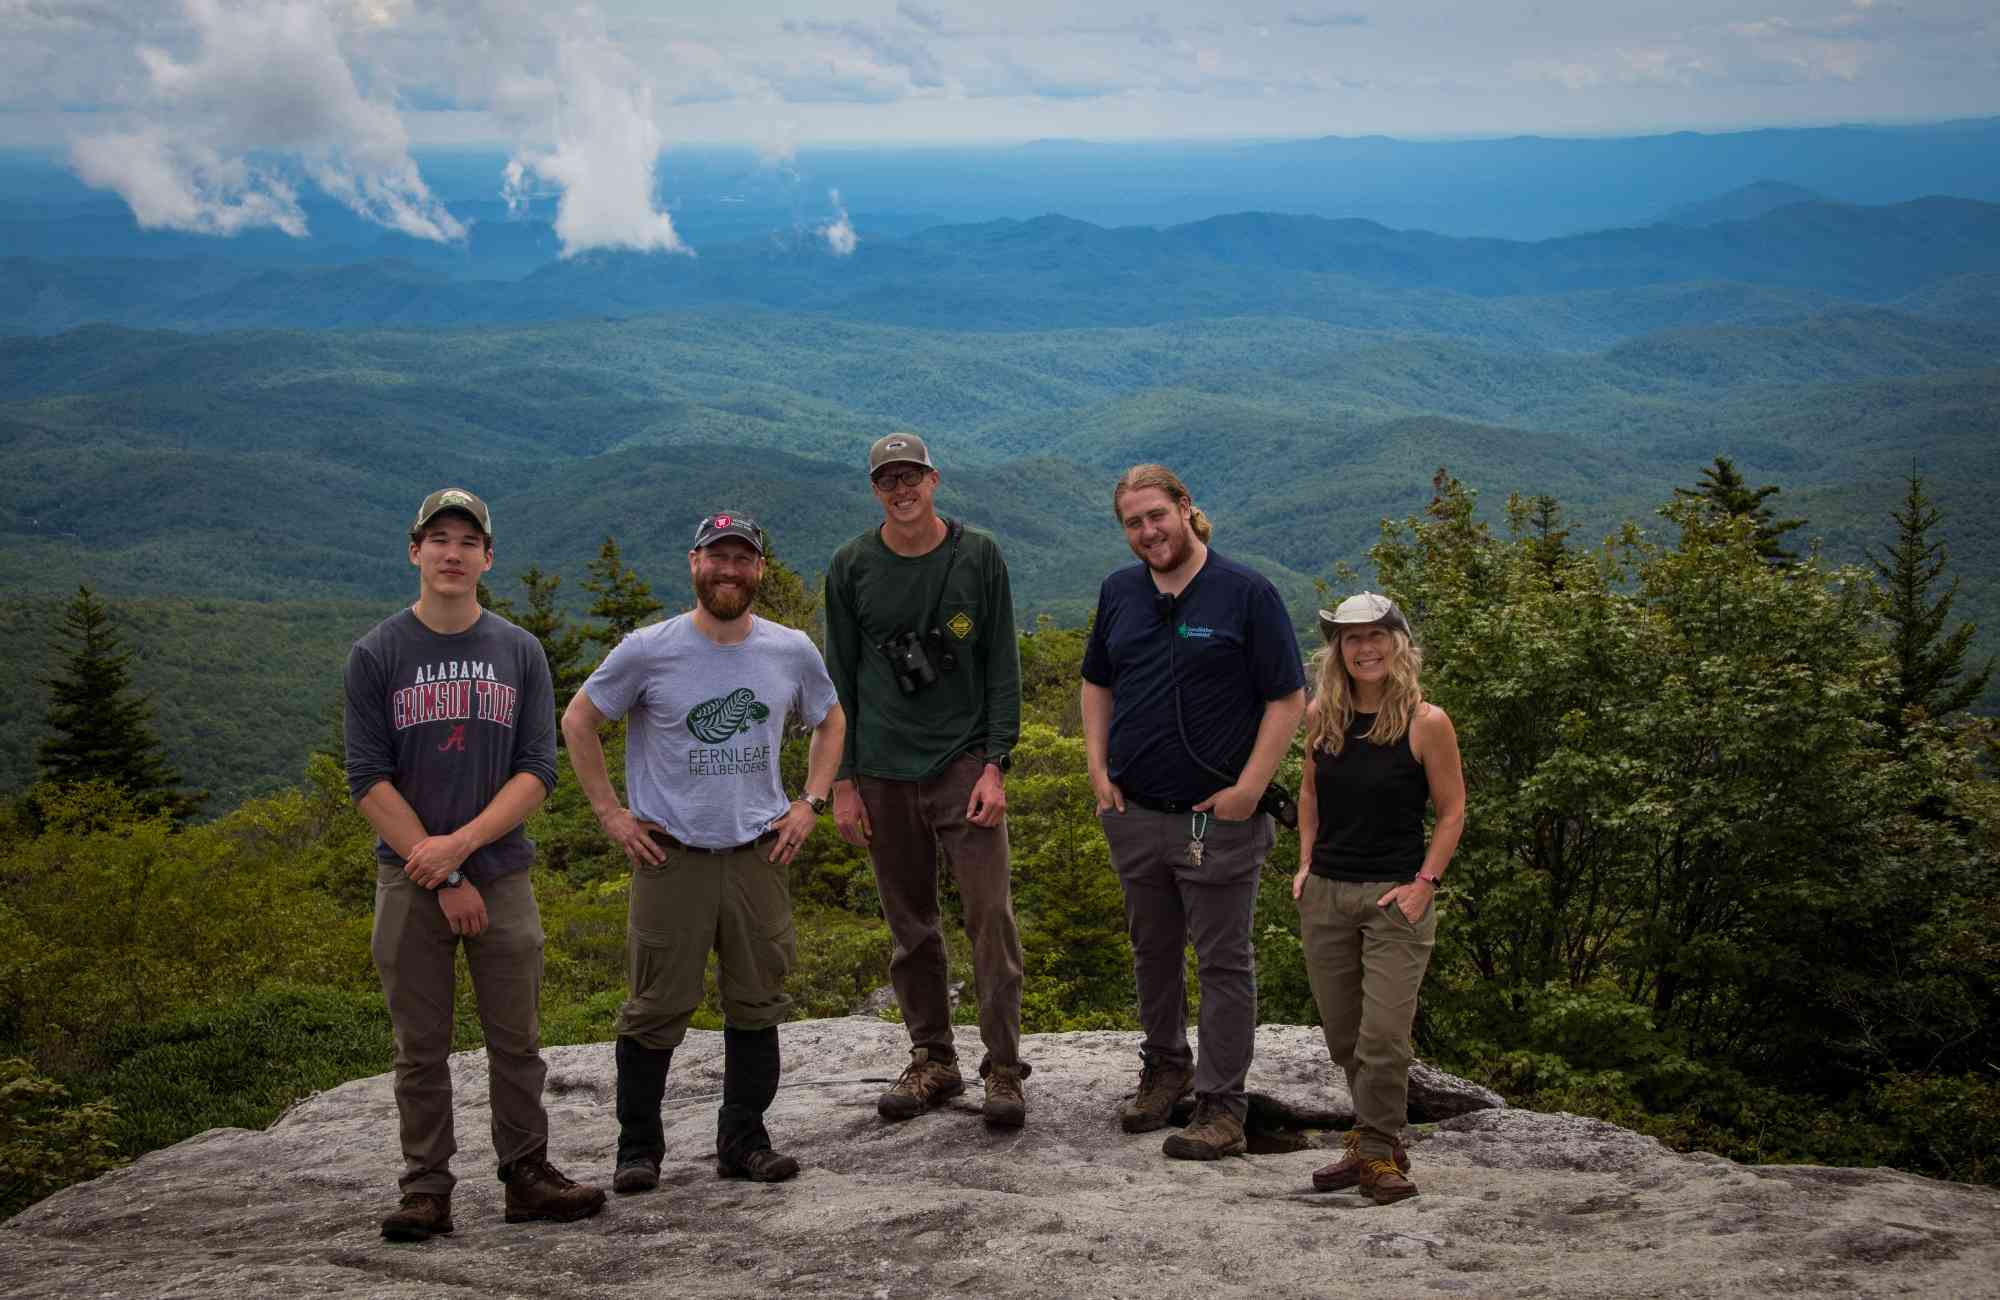 2023.09.14 - SE - Northern Saw-Whet Owl Box Project - Colin and crew group shot with mountain landscape at Grandfather Mountain State Park MS - Erin Fowler, Scraps of Lace Photography